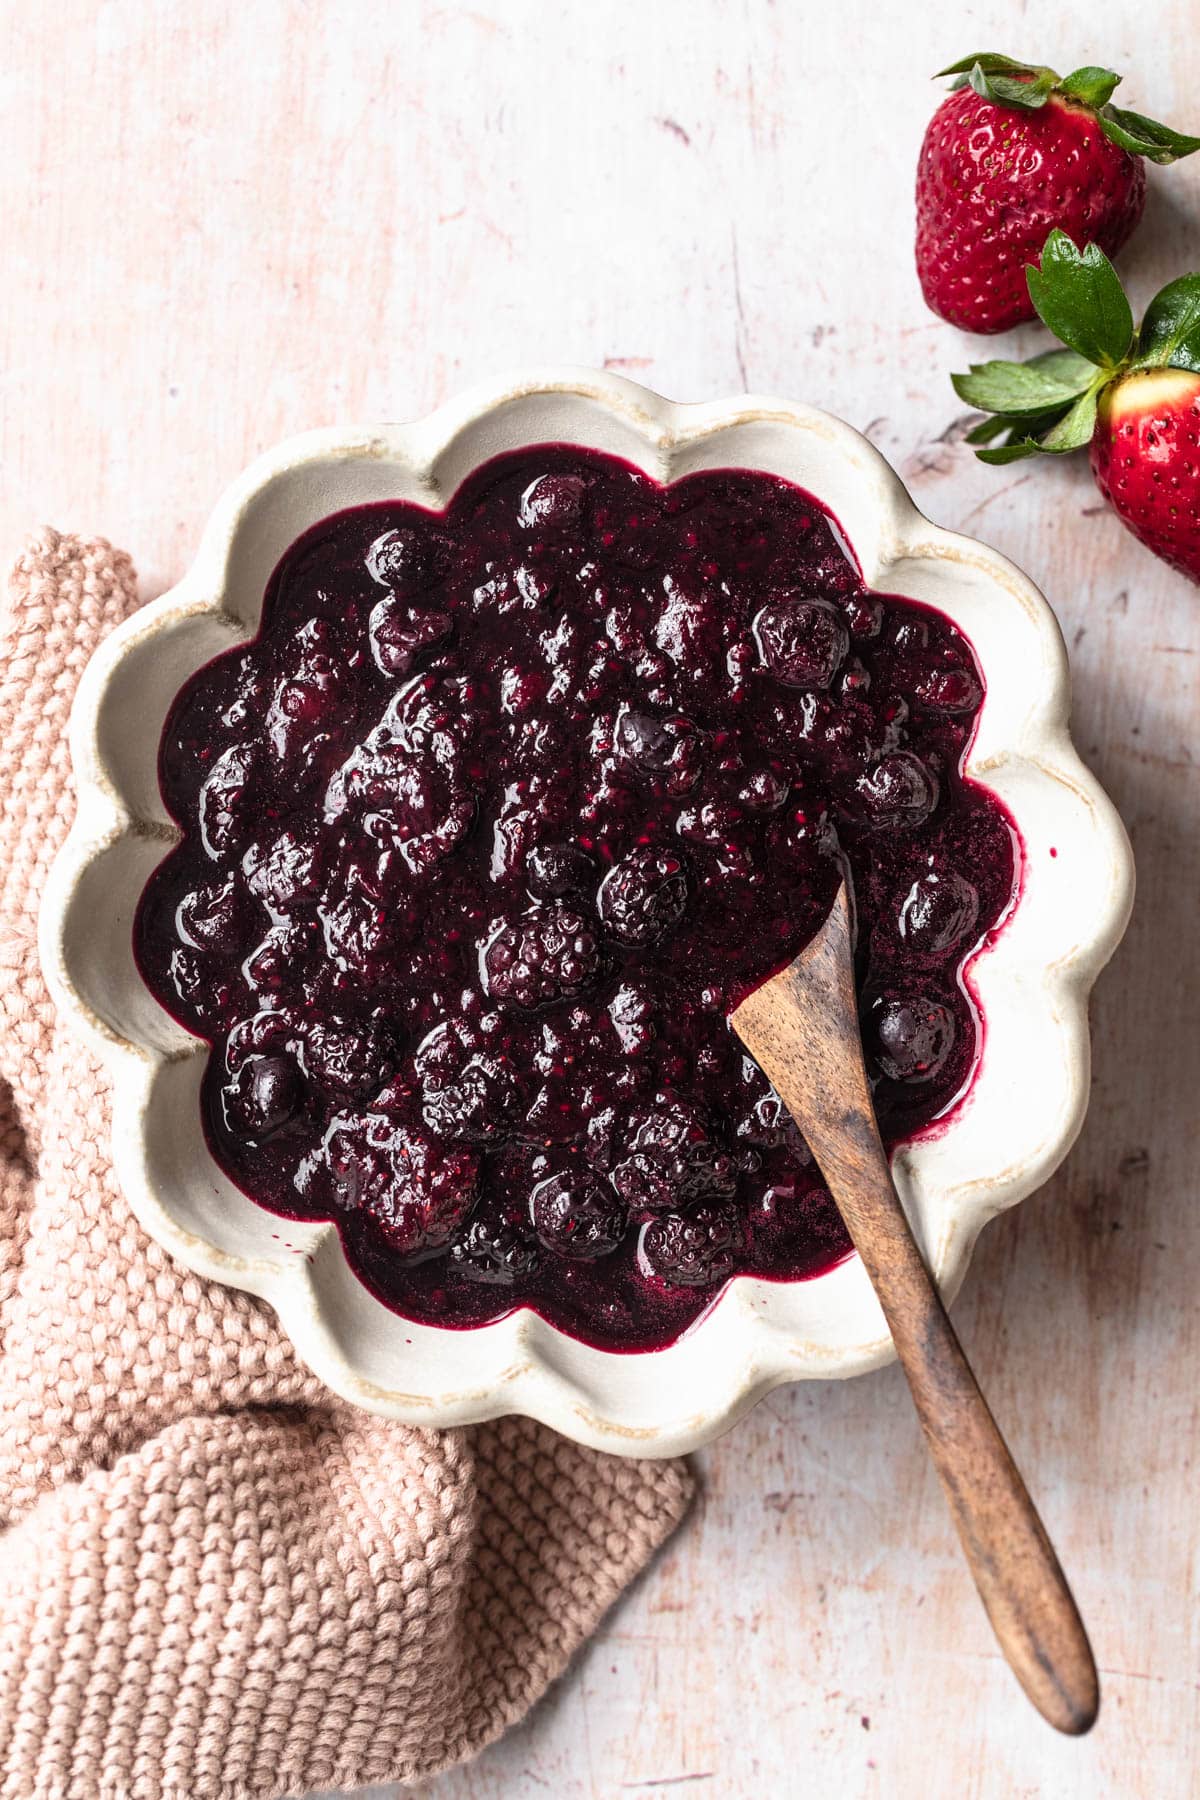 Mixed berry compote using frozen berries in a small bowl.